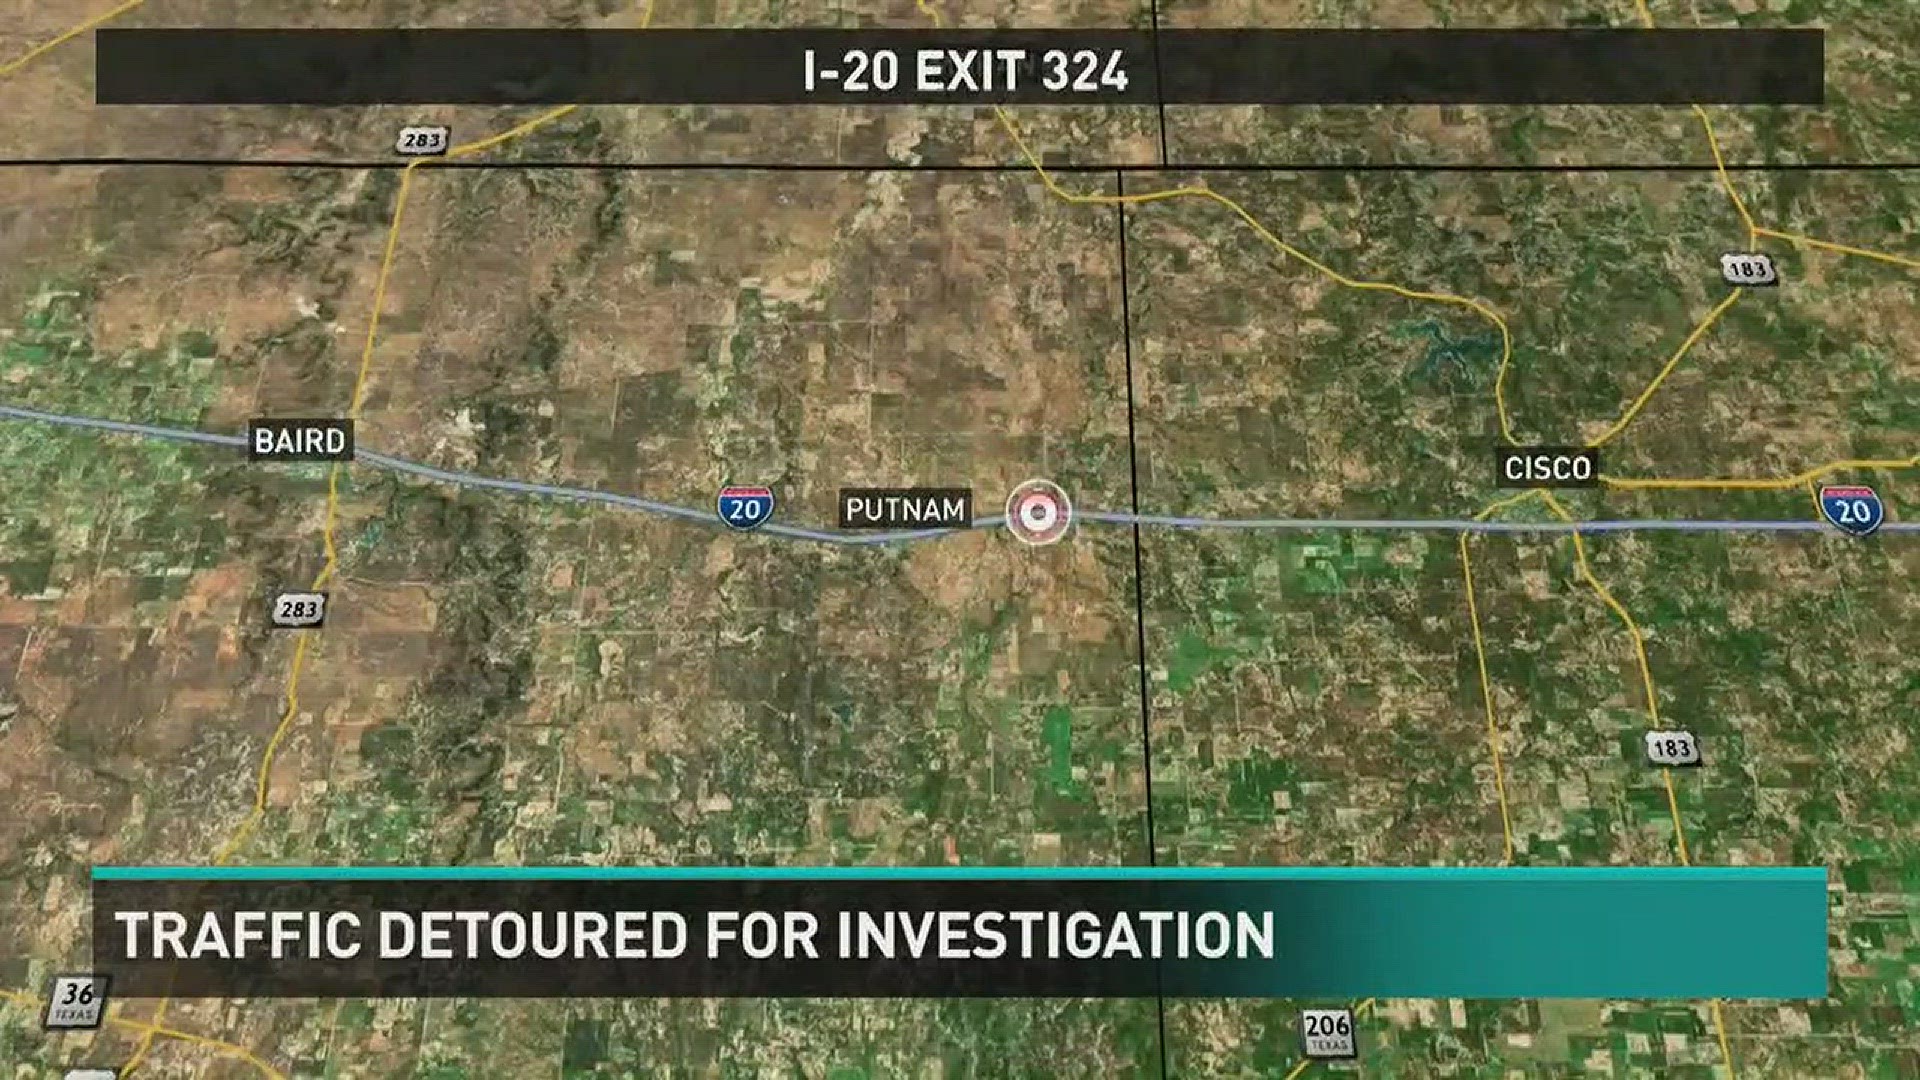 Due to DPS conducting a crash investigation, I-20 westbound near the 324 mile marker in Callahan County will be detoured.